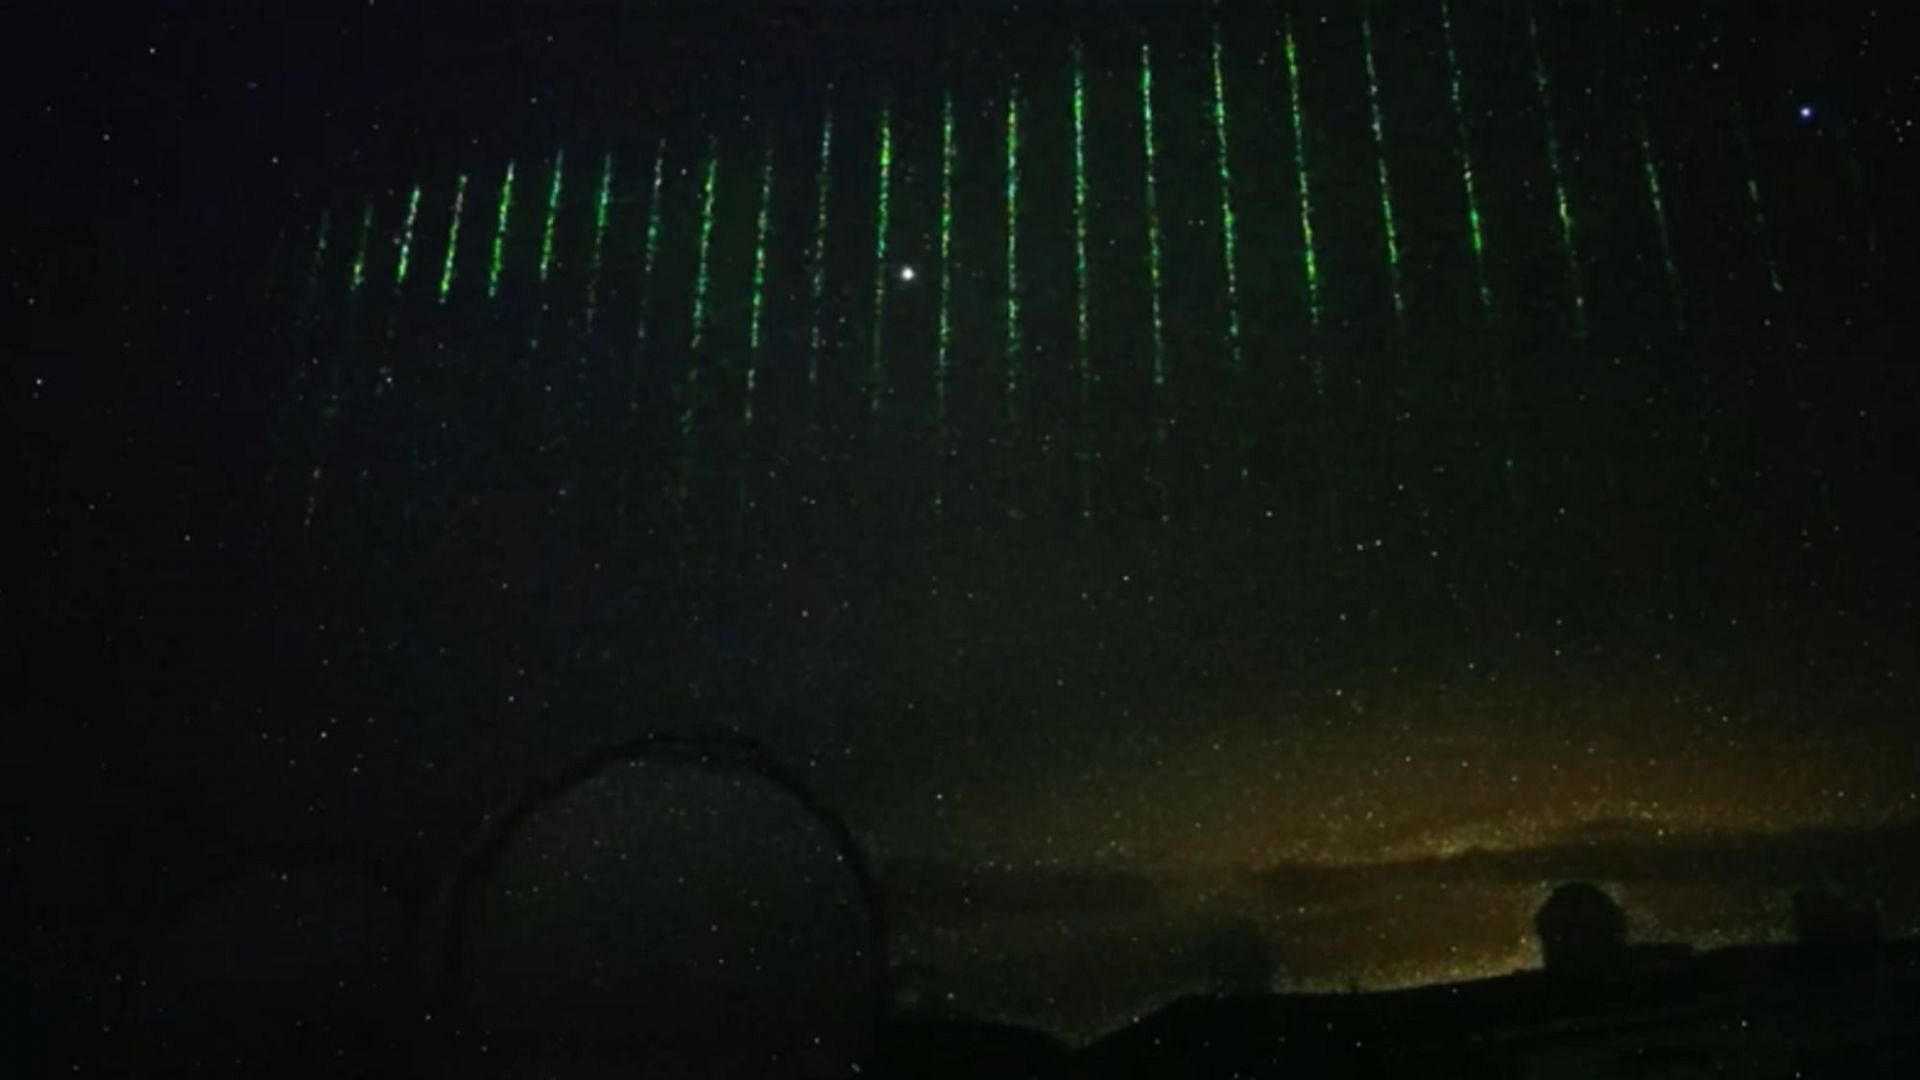 Green lasers seen in Hawaii sparks hilarious reactions (Image via NAOJ)